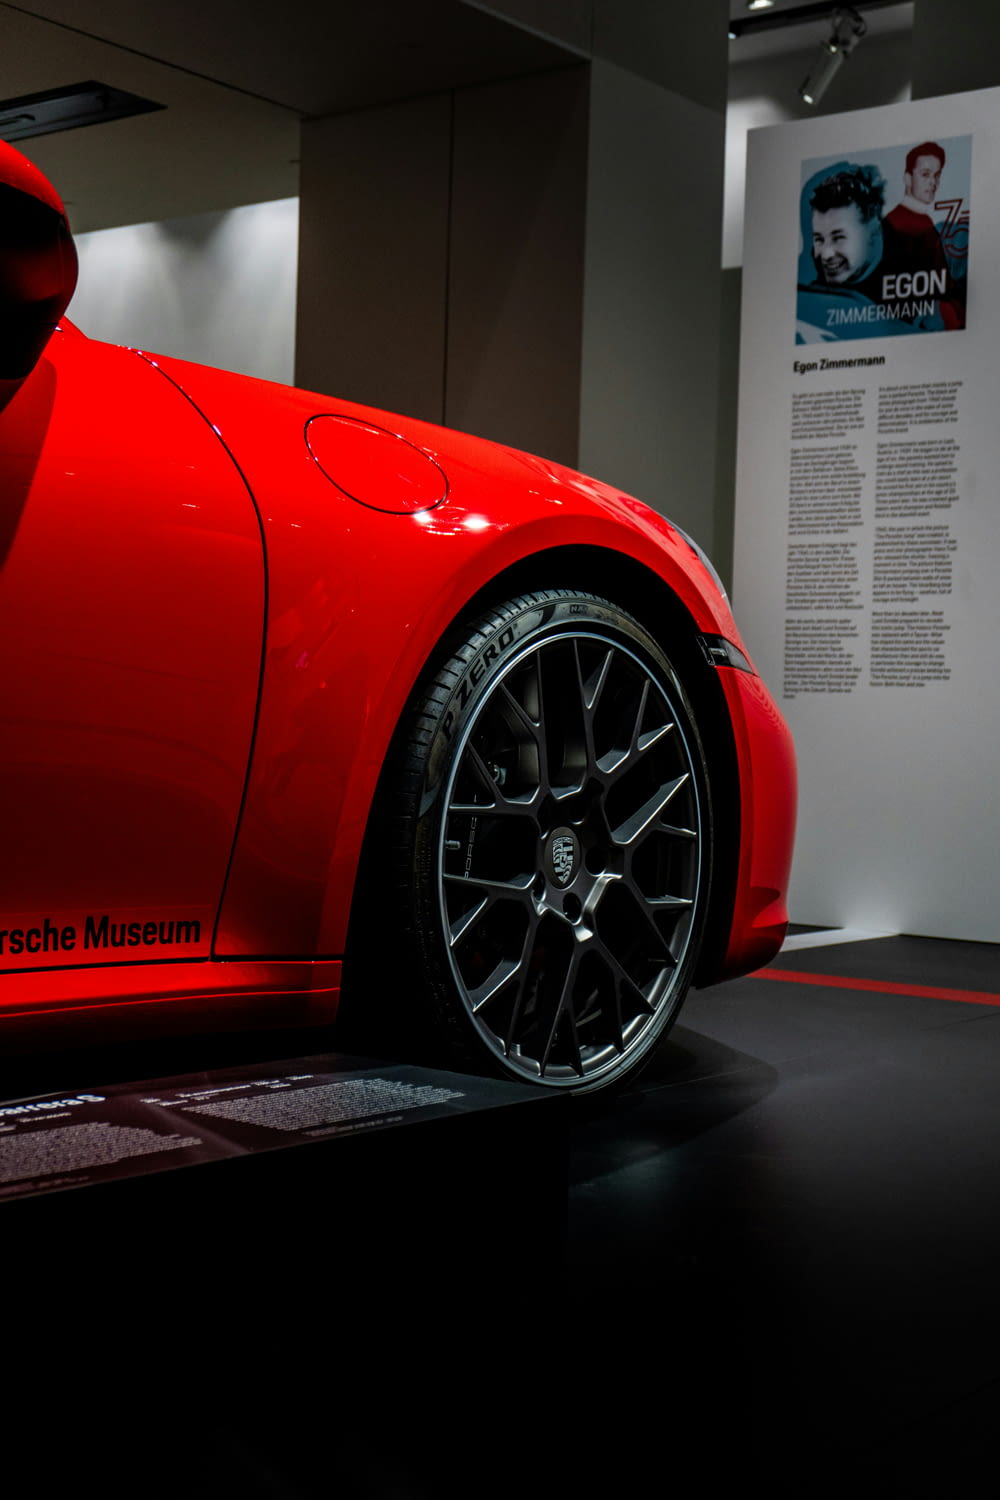 a red sports car on display in a museum